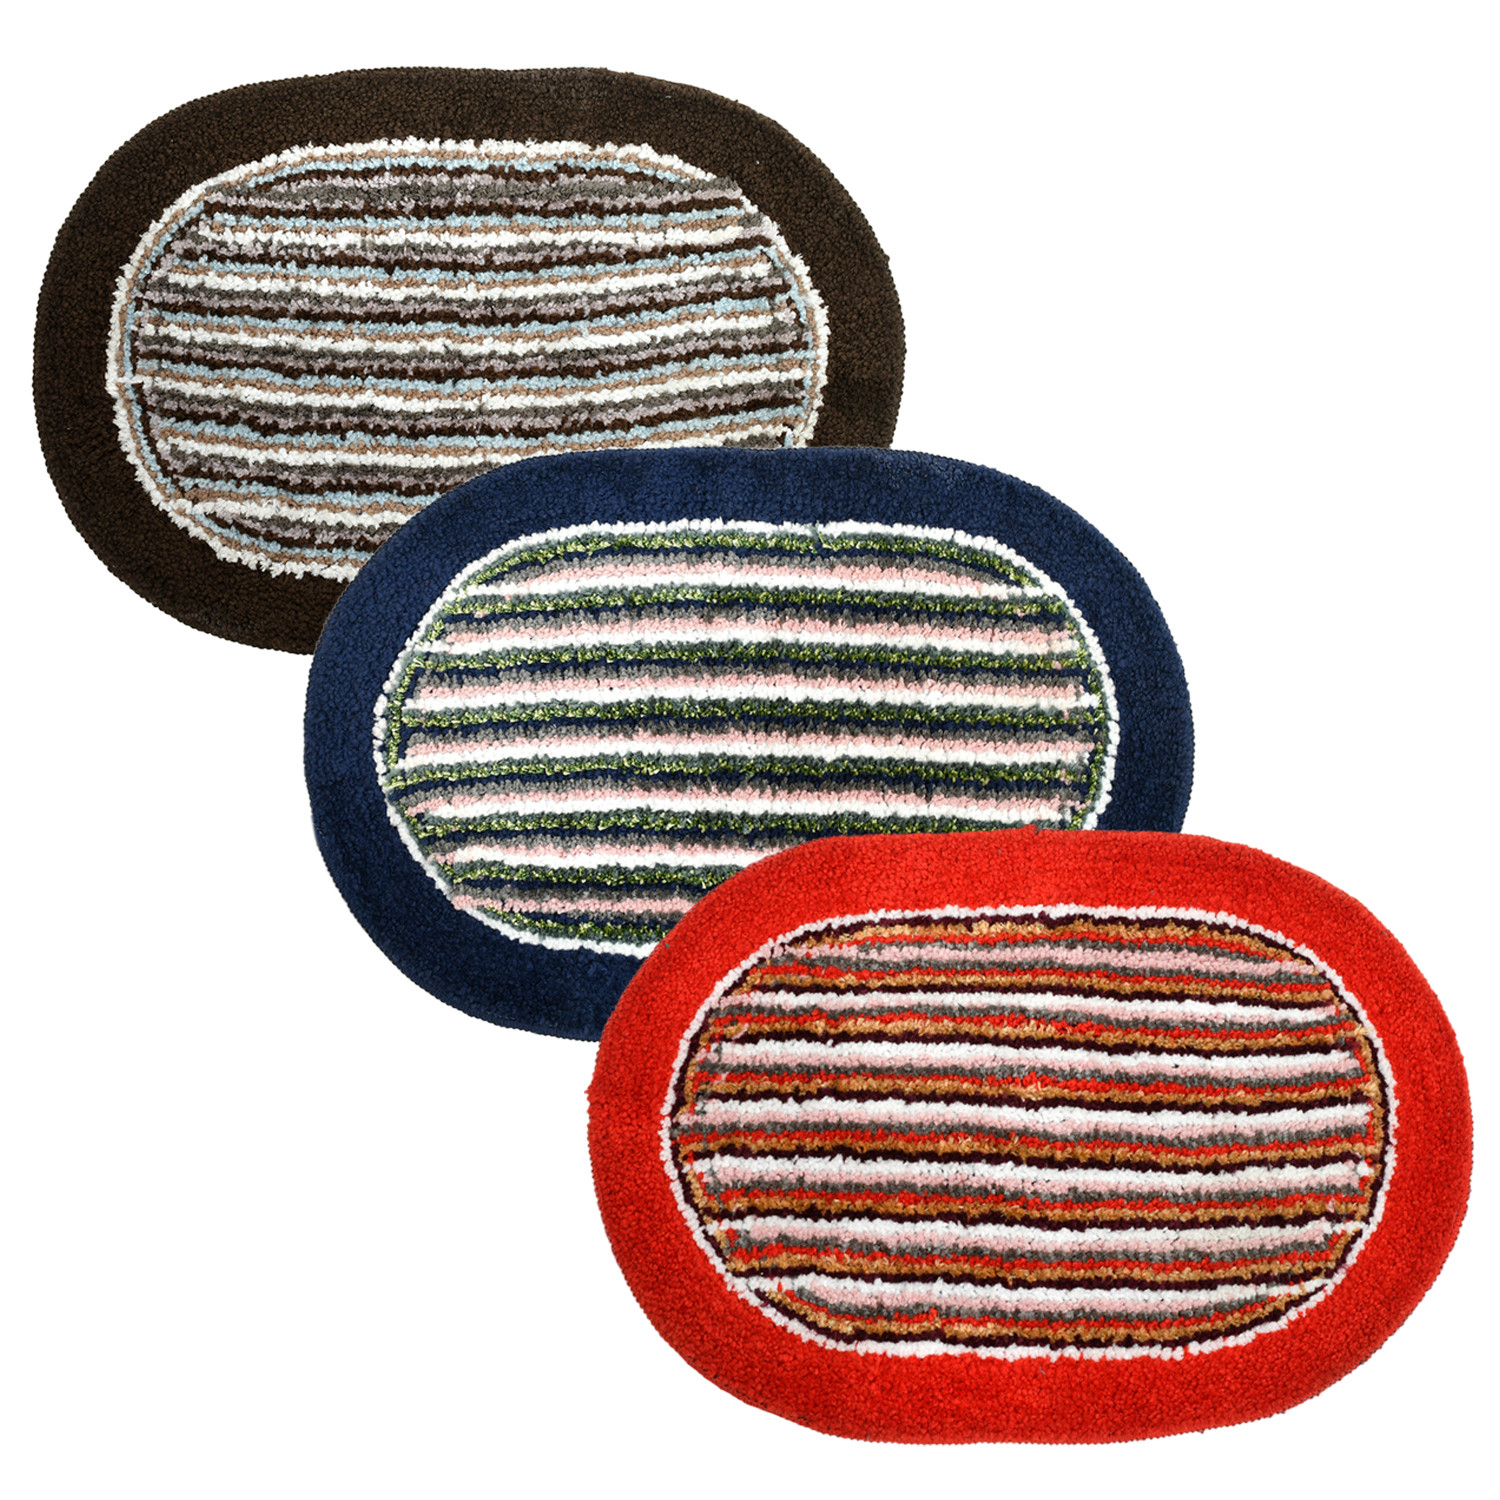 Kuber Industries Strips Design Soft Cotton Doormat Dirts Trapper Mat Bath Door Mat Machine Washable For Porch/Kitchen/Bathroom/Laundry Room- Pack of 3 (Red & Blue & Brown)